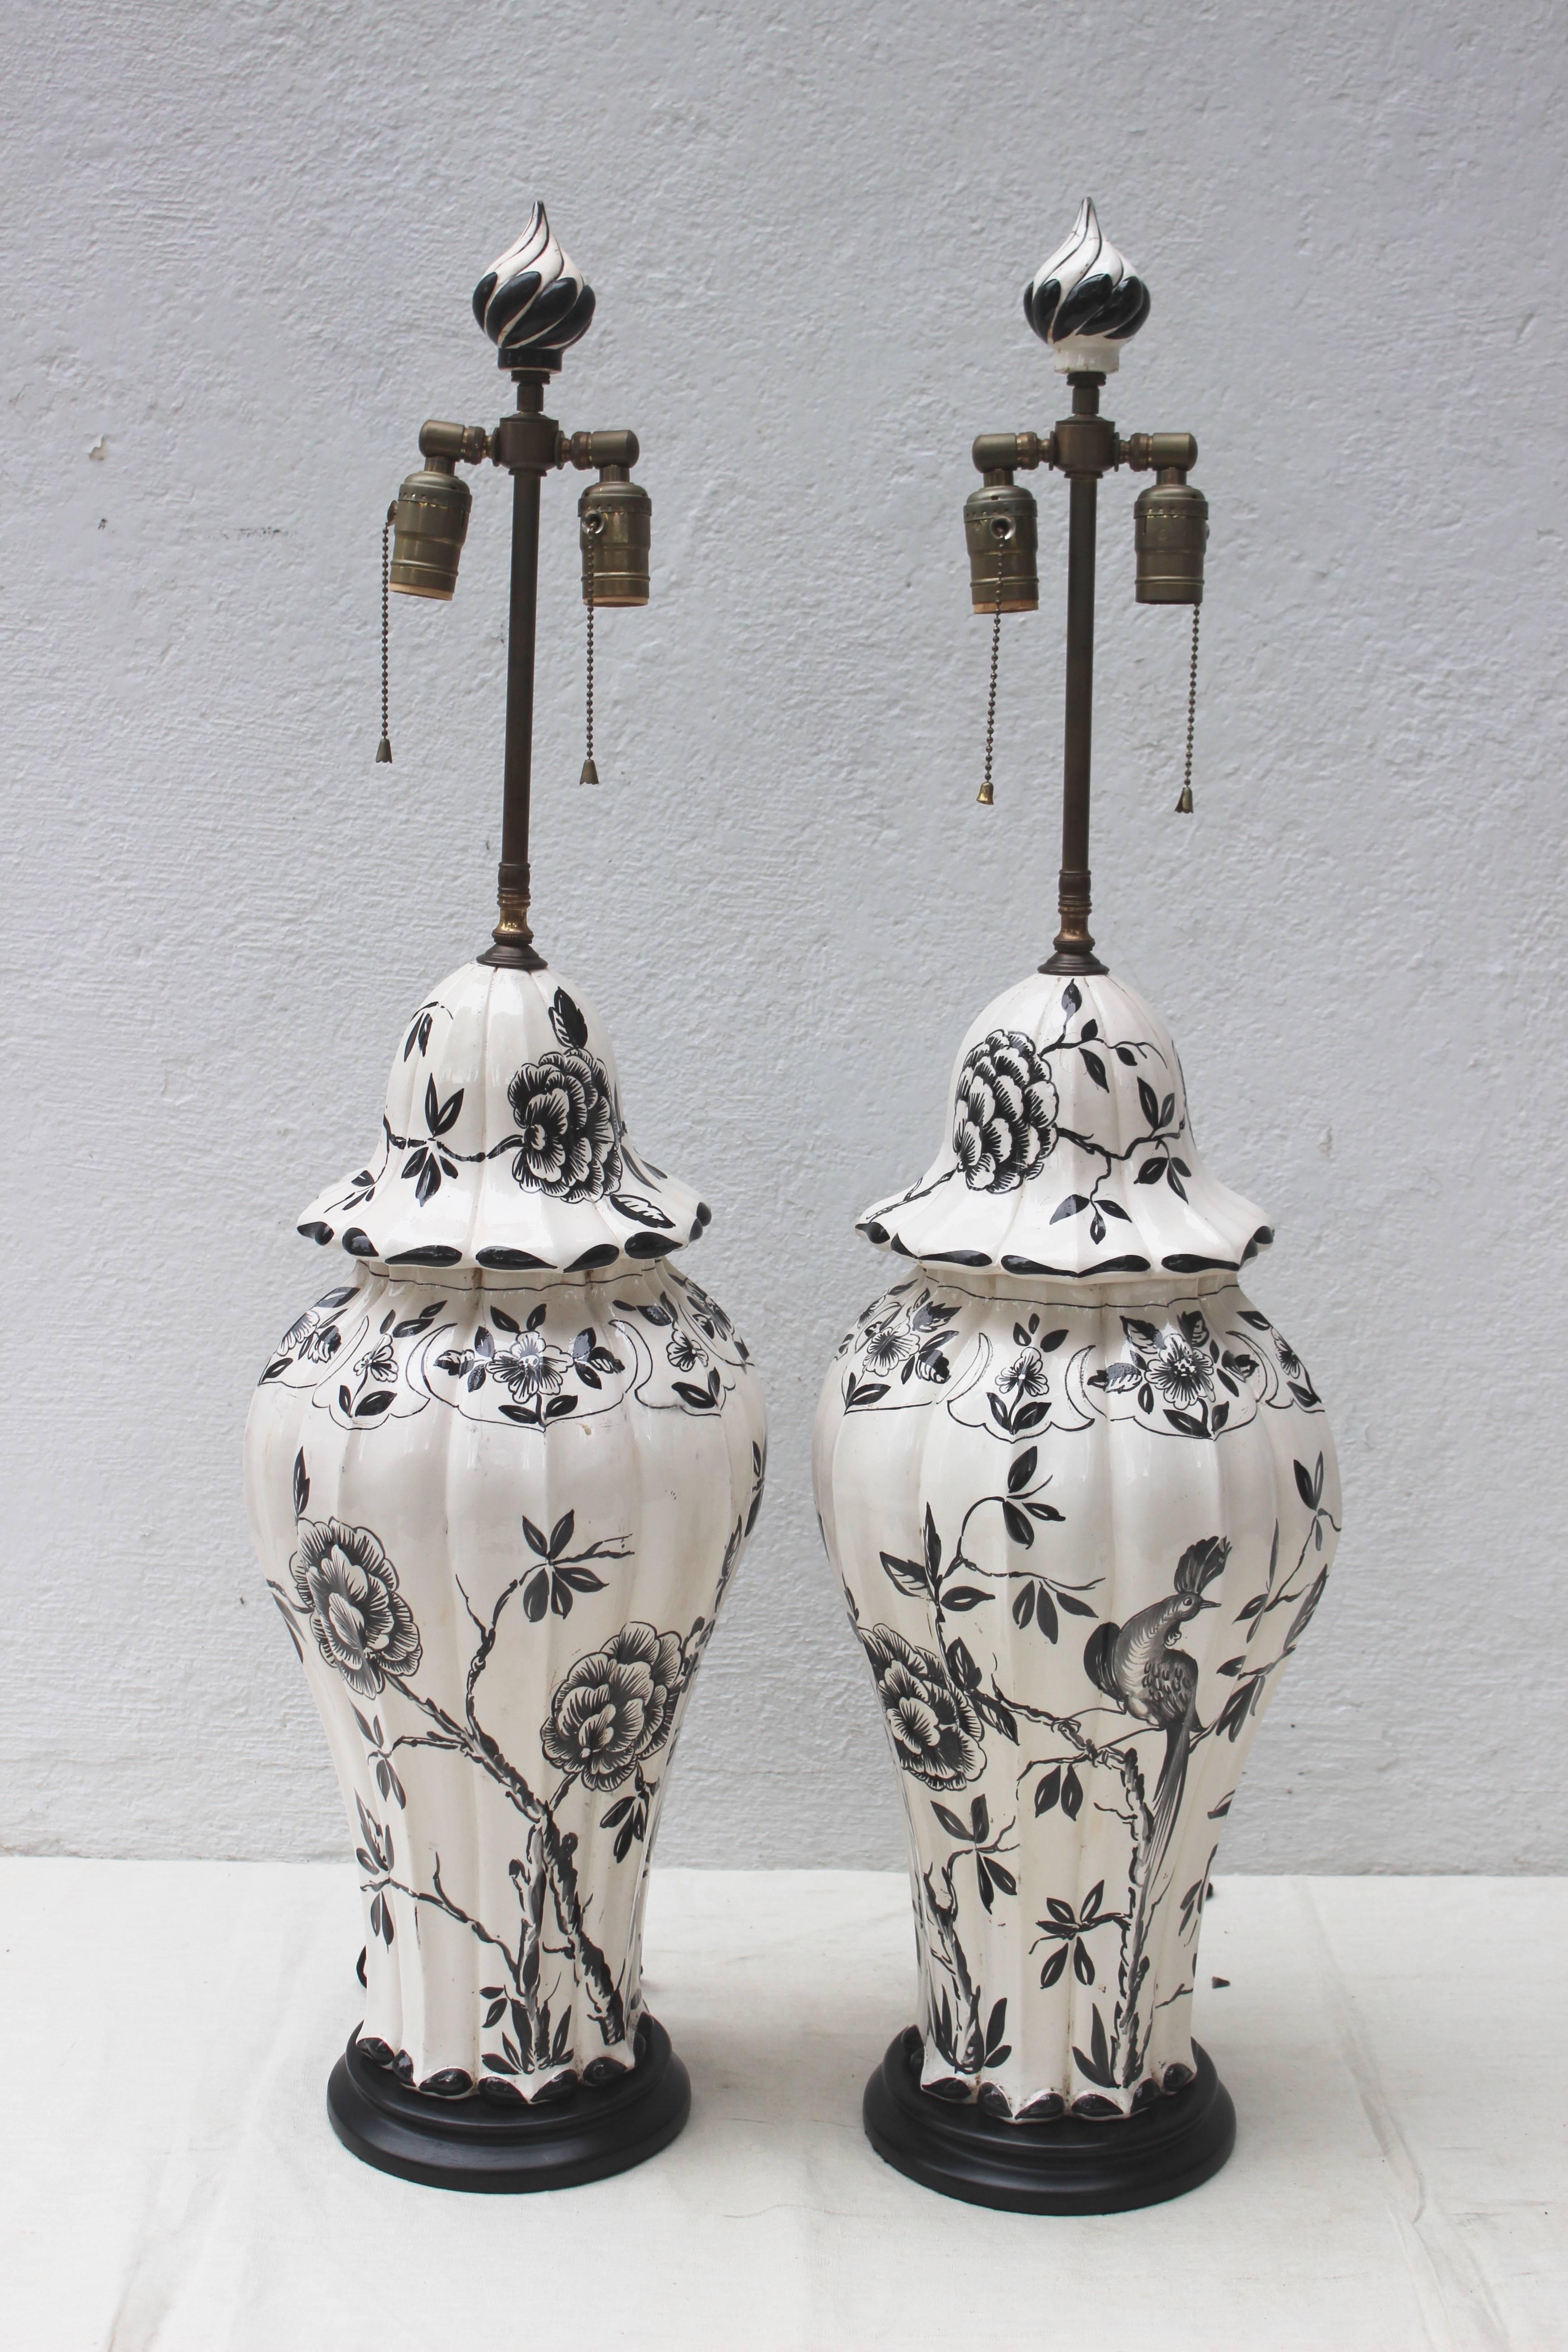 Great pair of black and white ceramic lamps of great scale with matching finials and newly wired with silk cording.